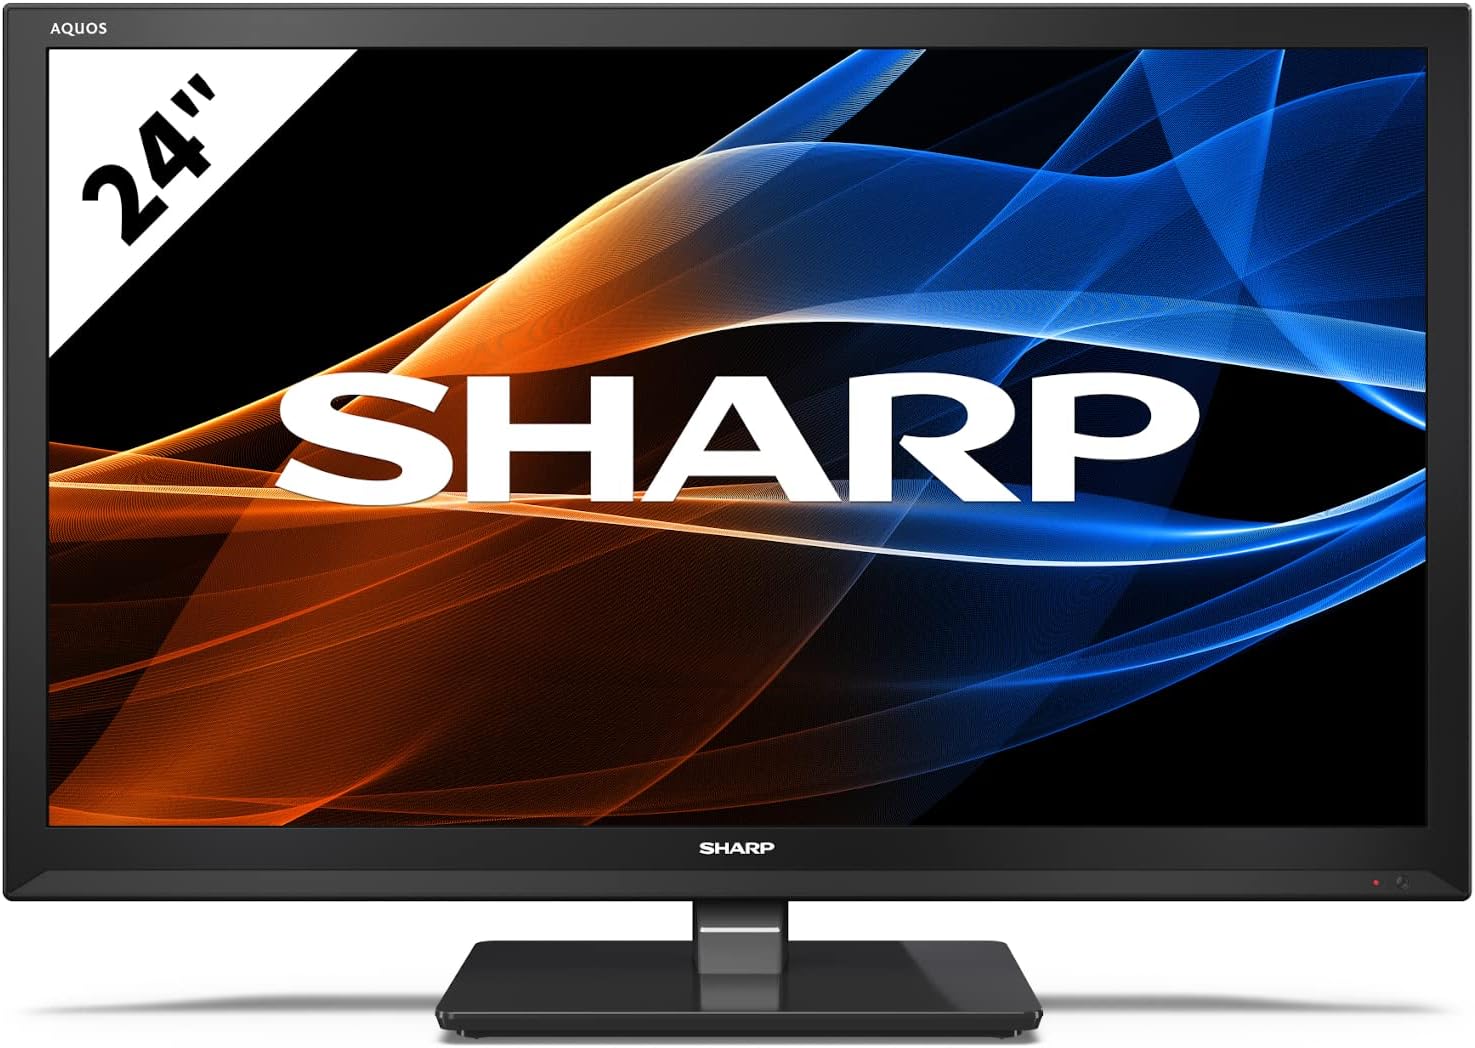 SHARP 24EA3K 24 Inch 720p HD Ready LED TV with Freeview HD, 2 x HDMI, SCART, USB Record and Media Player - Black - Amazing Gadgets Outlet